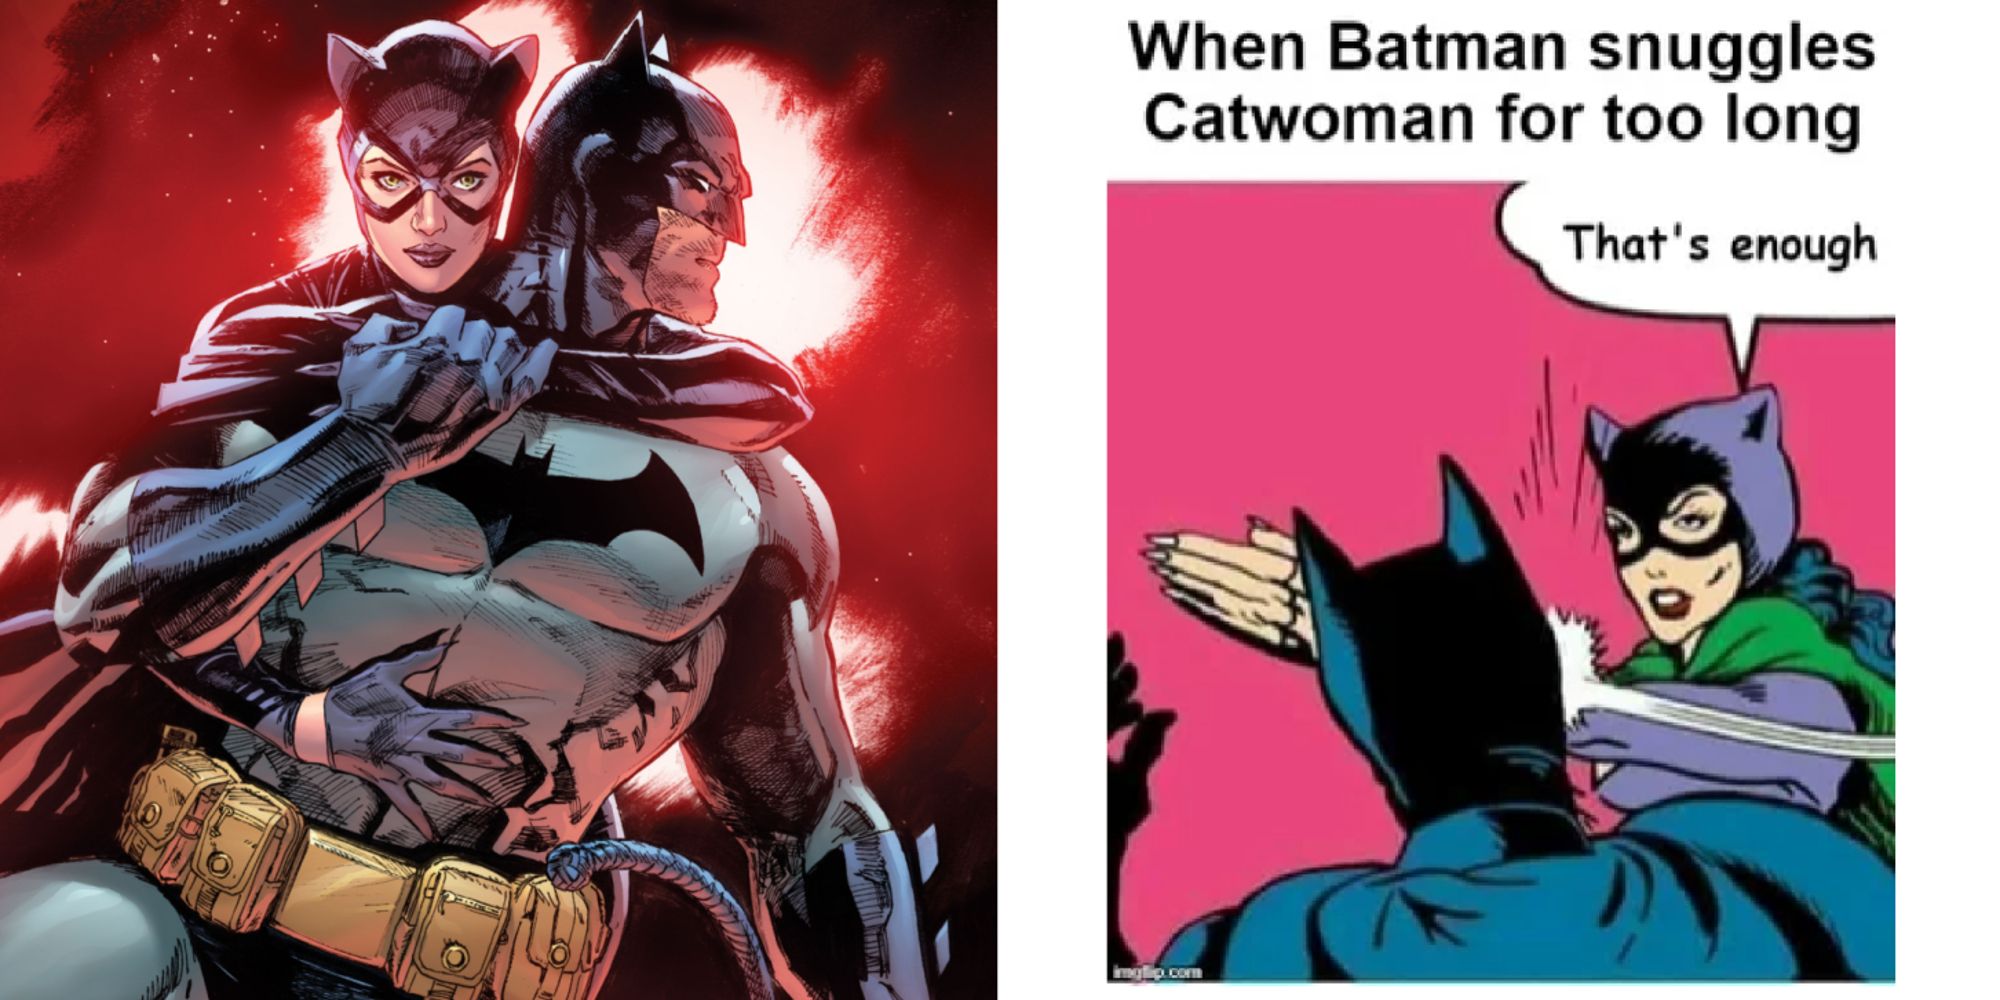 10 Memes That Perfectly Sum Up Batman And Catwoman's Relationship